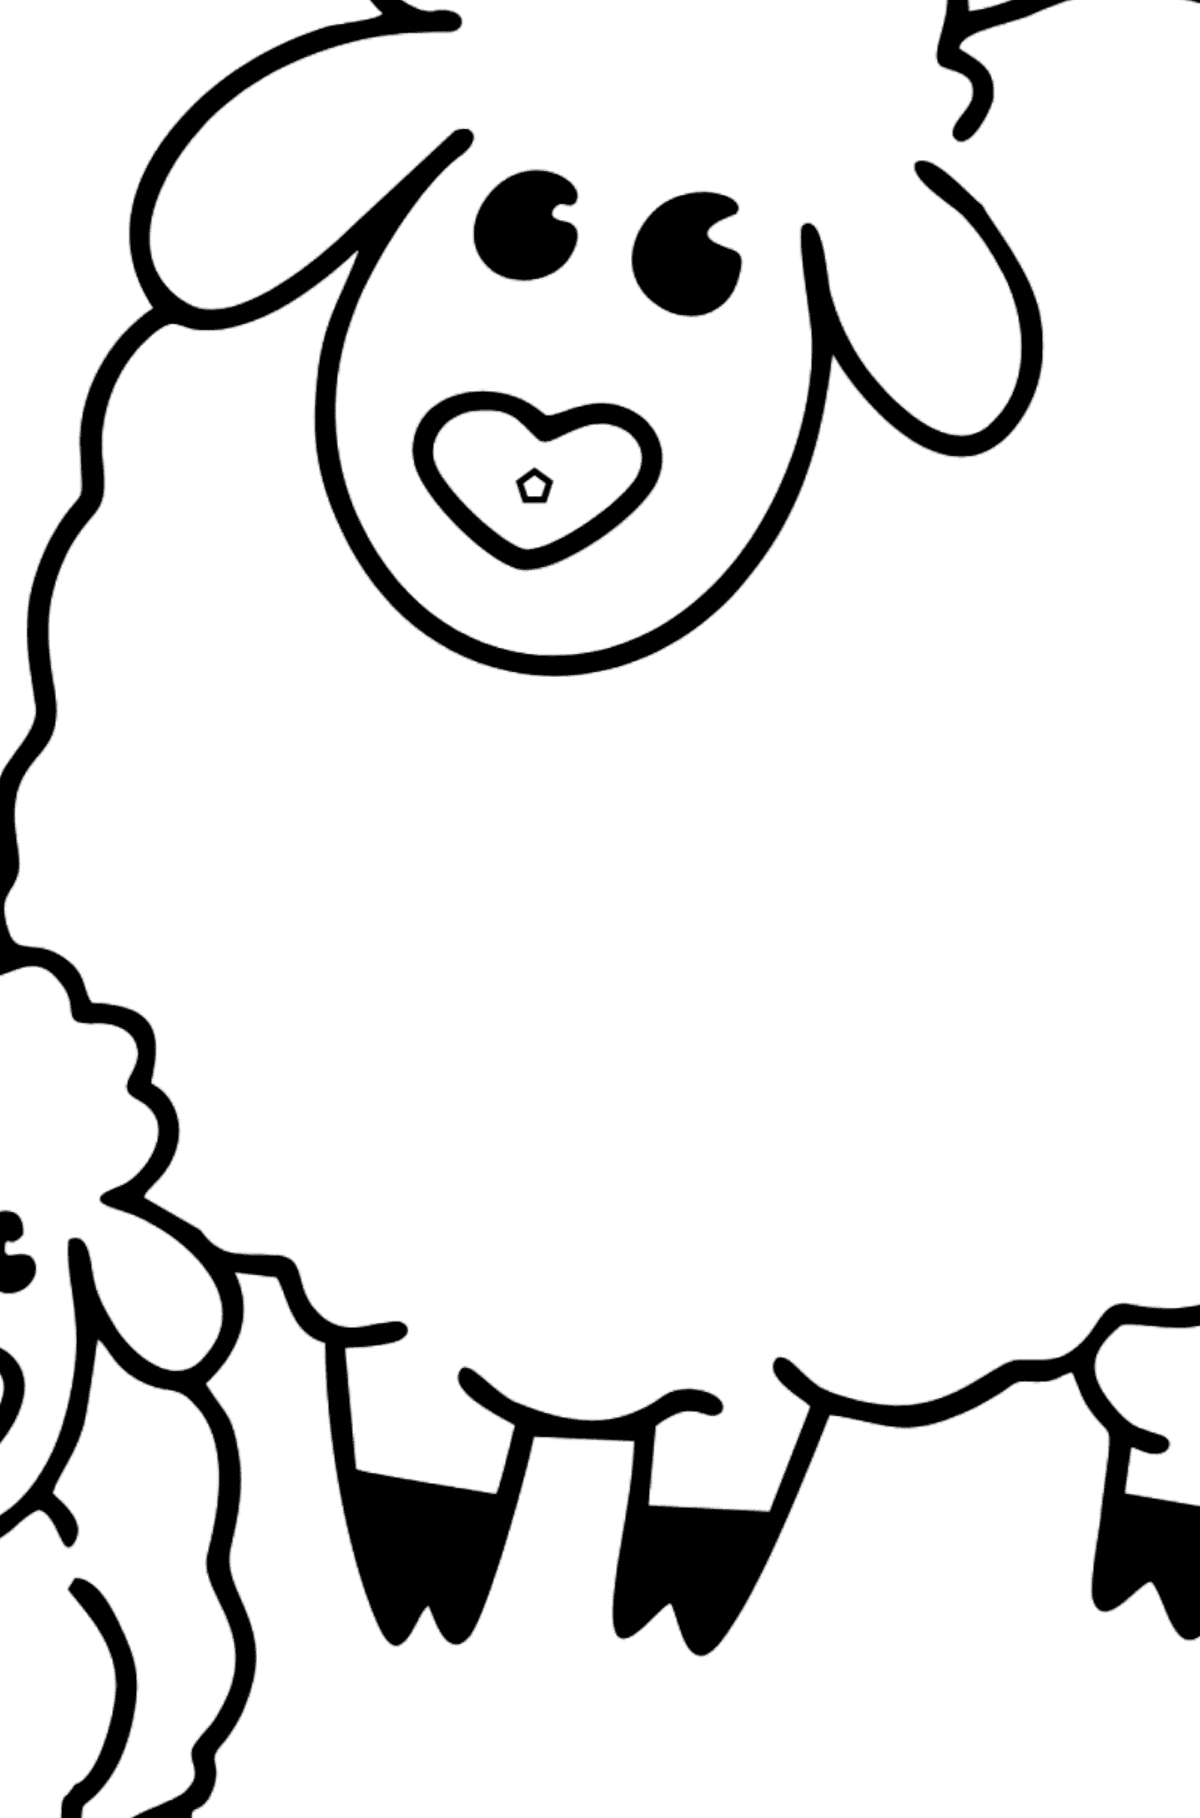 Sheep with Lamb coloring page - Coloring by Geometric Shapes for Kids